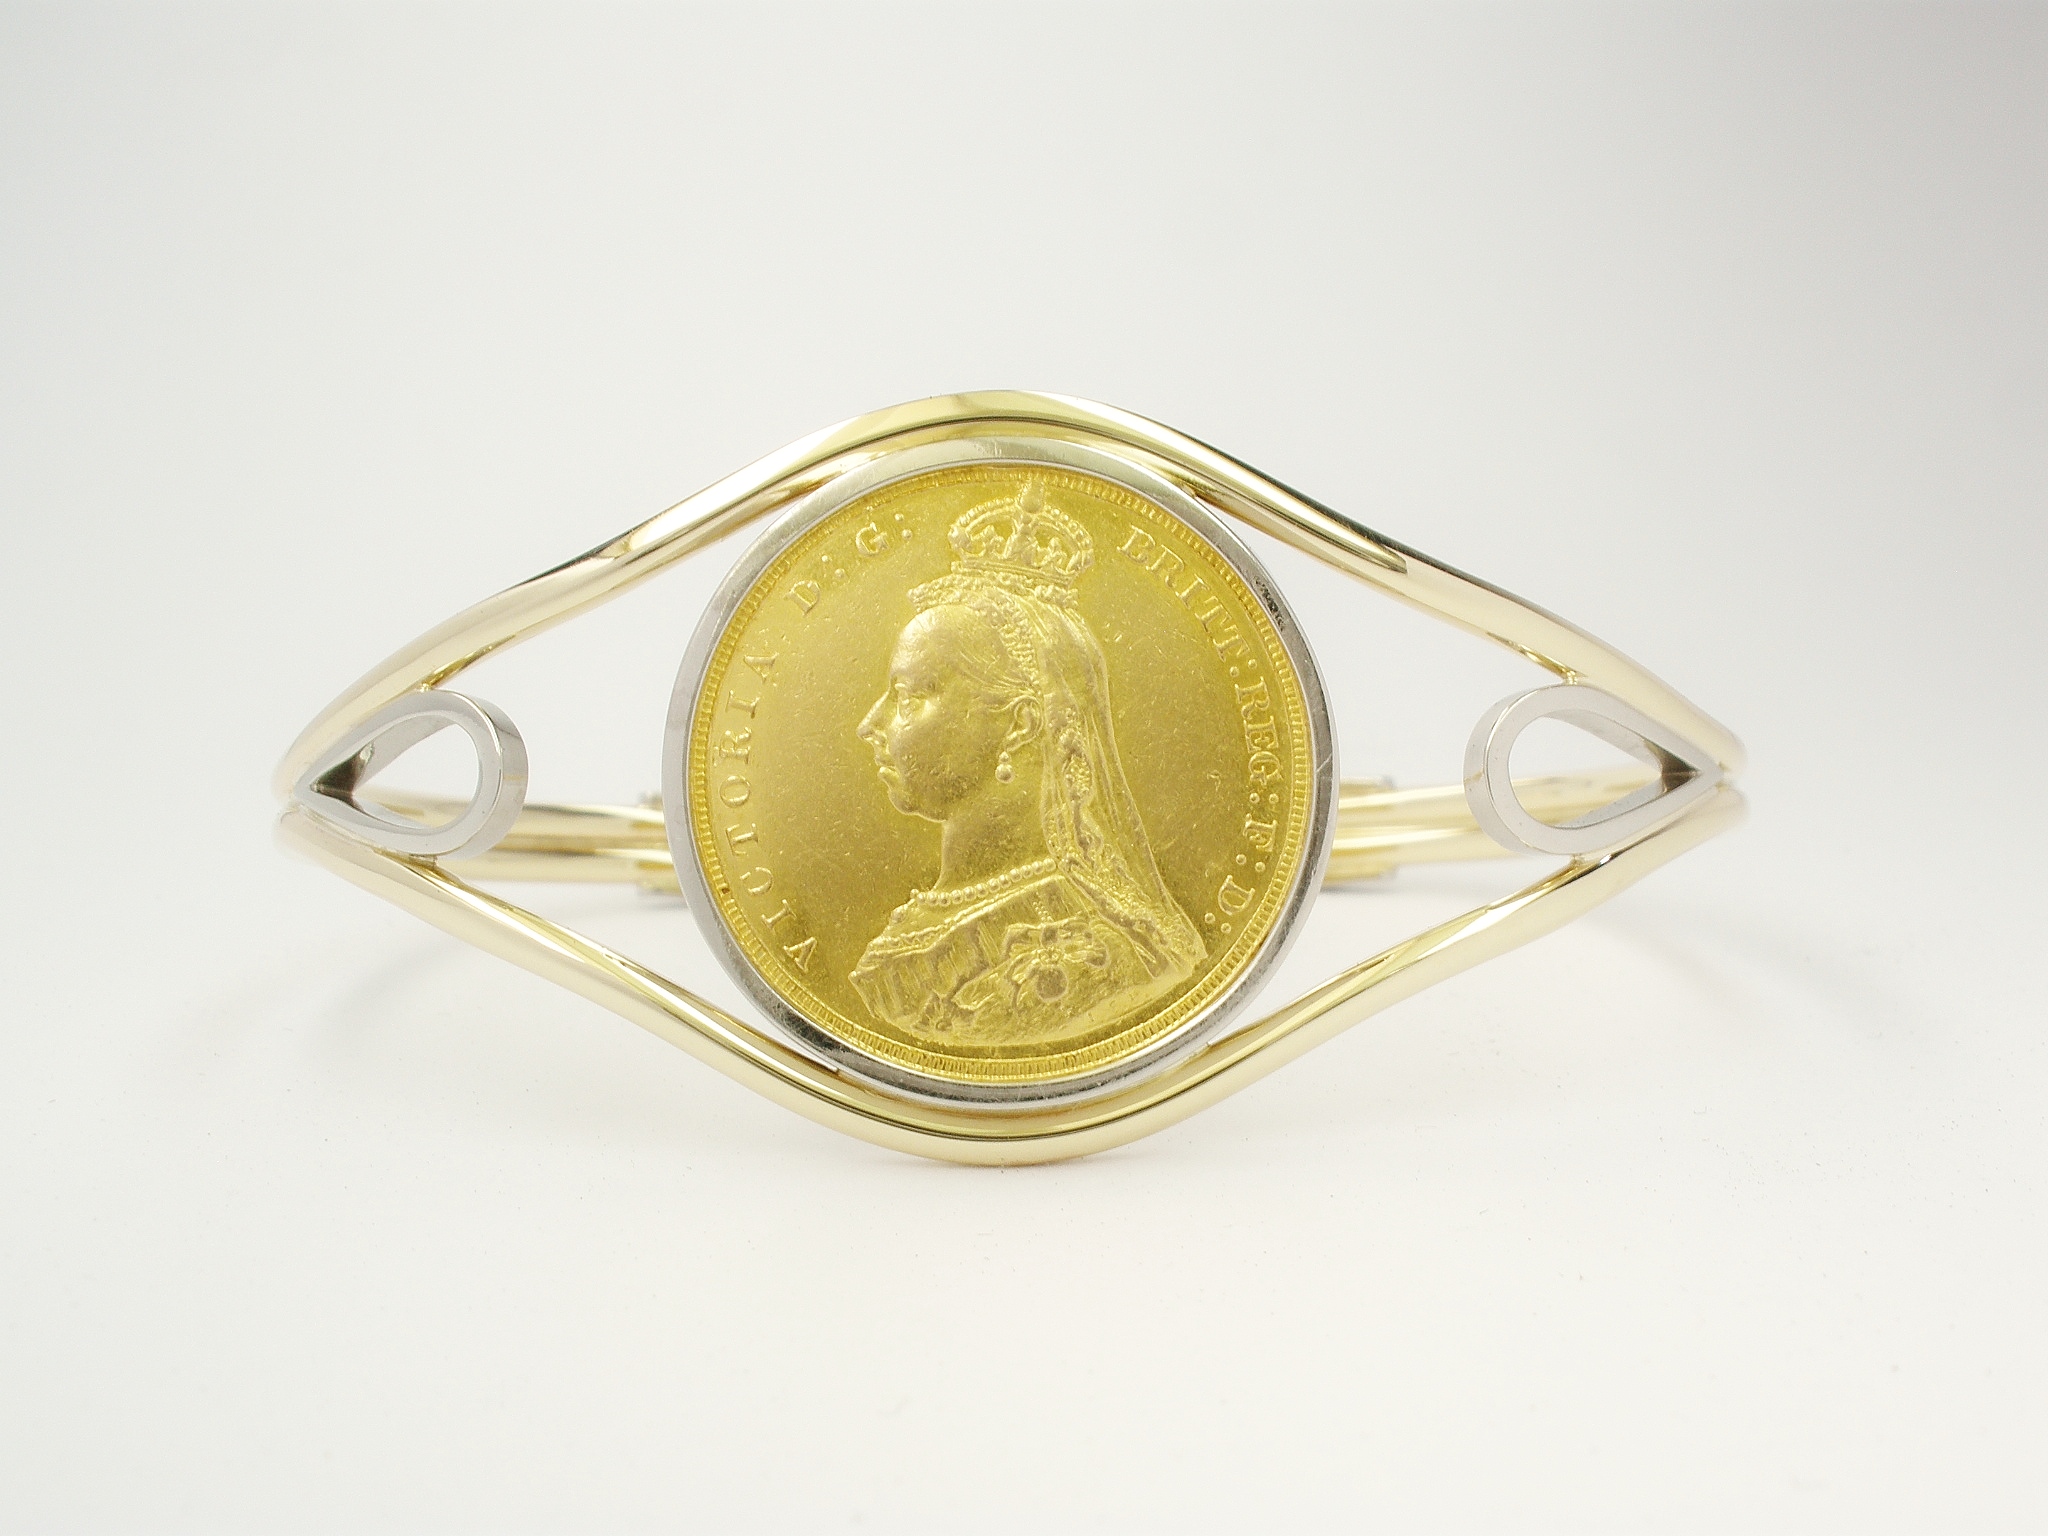 9ct. yellow gold and palladium torque bangle mounted with a single gold full sovereign coin.